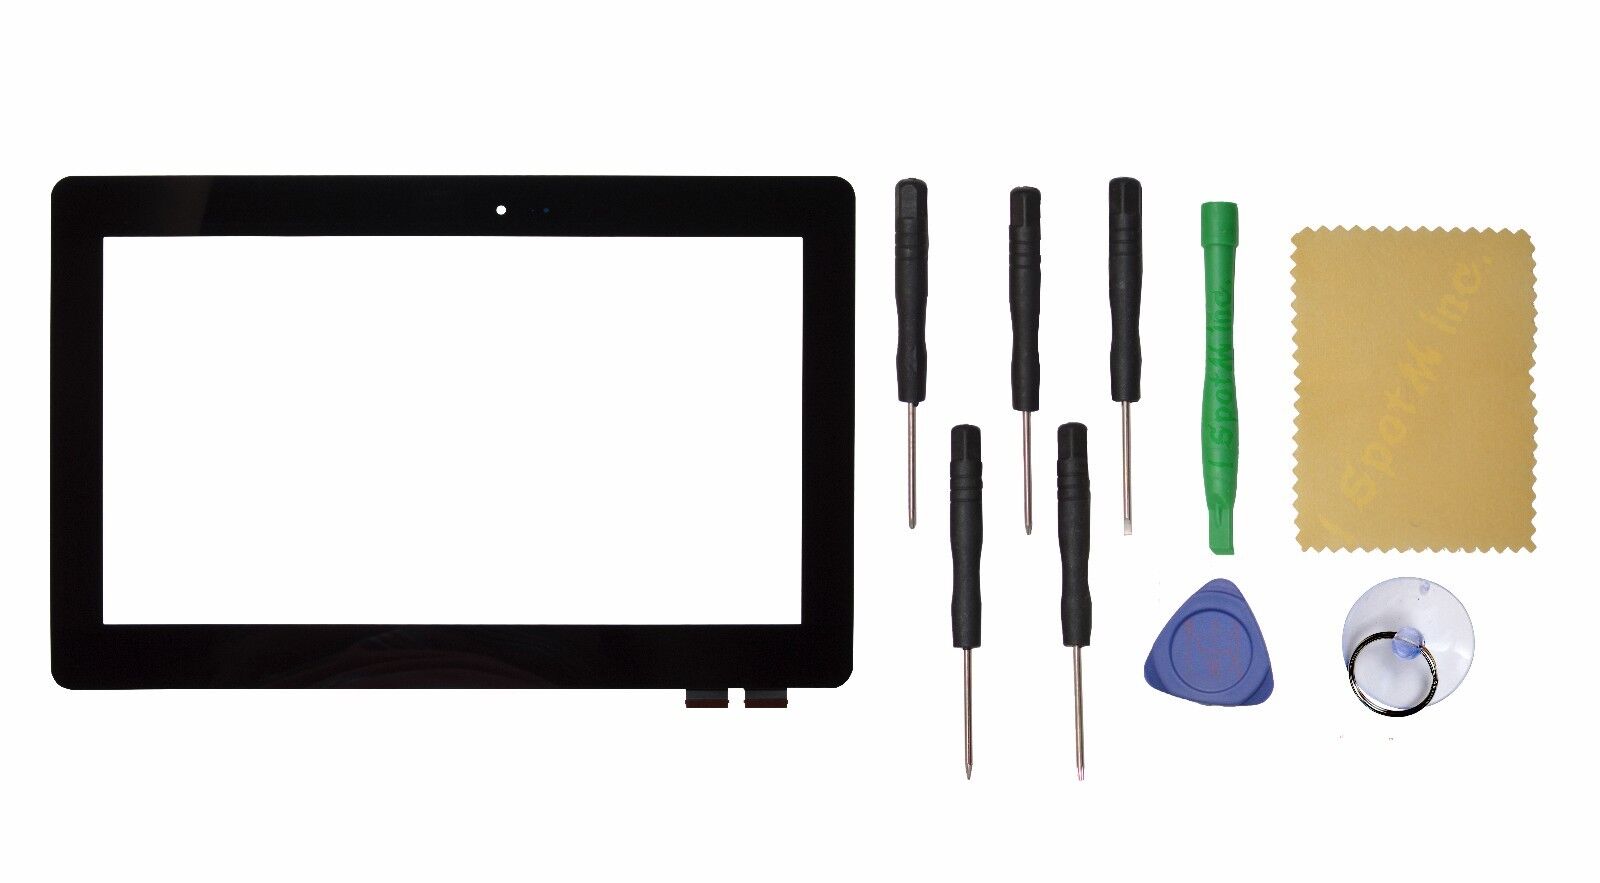 Touch Screen Digitizer Replacement for Asus Transformer Book T100 T100TA Unbranded/Generic Does not apply